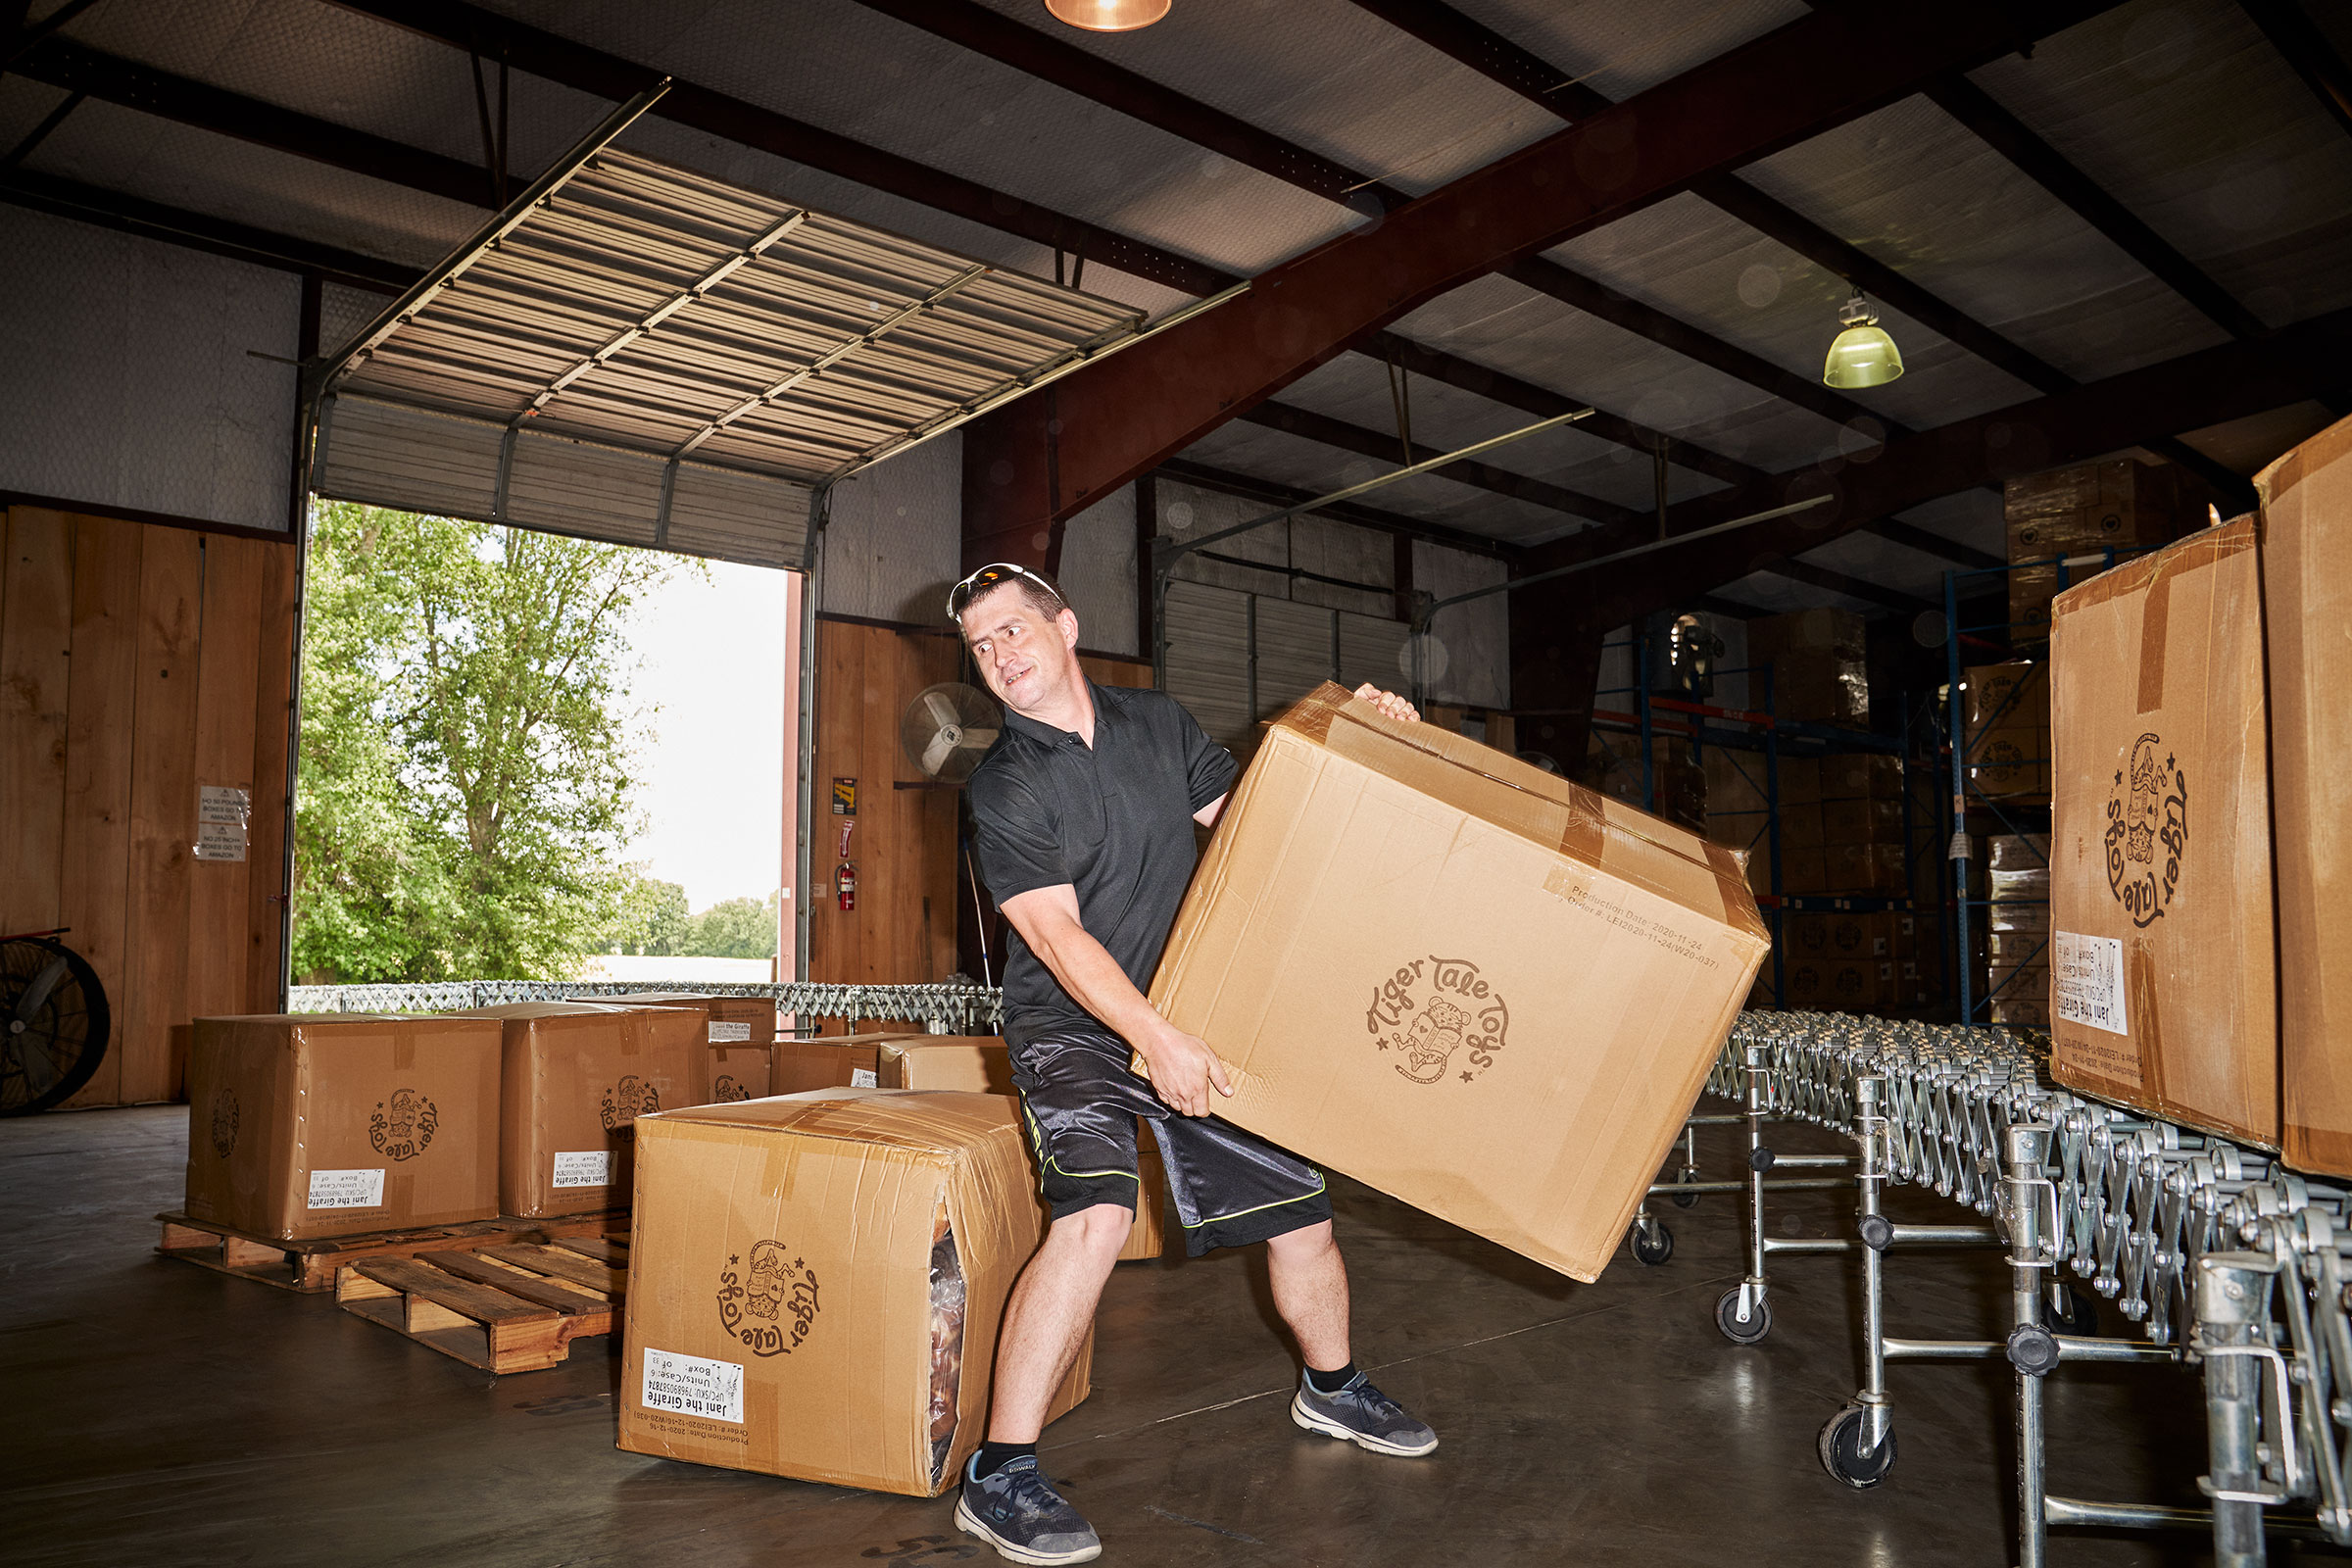 Boxes are sorted at the Viahart distribution facility in Wills Point, Texas on July 23, 2021. (Jonathan Zizzo for TIME)